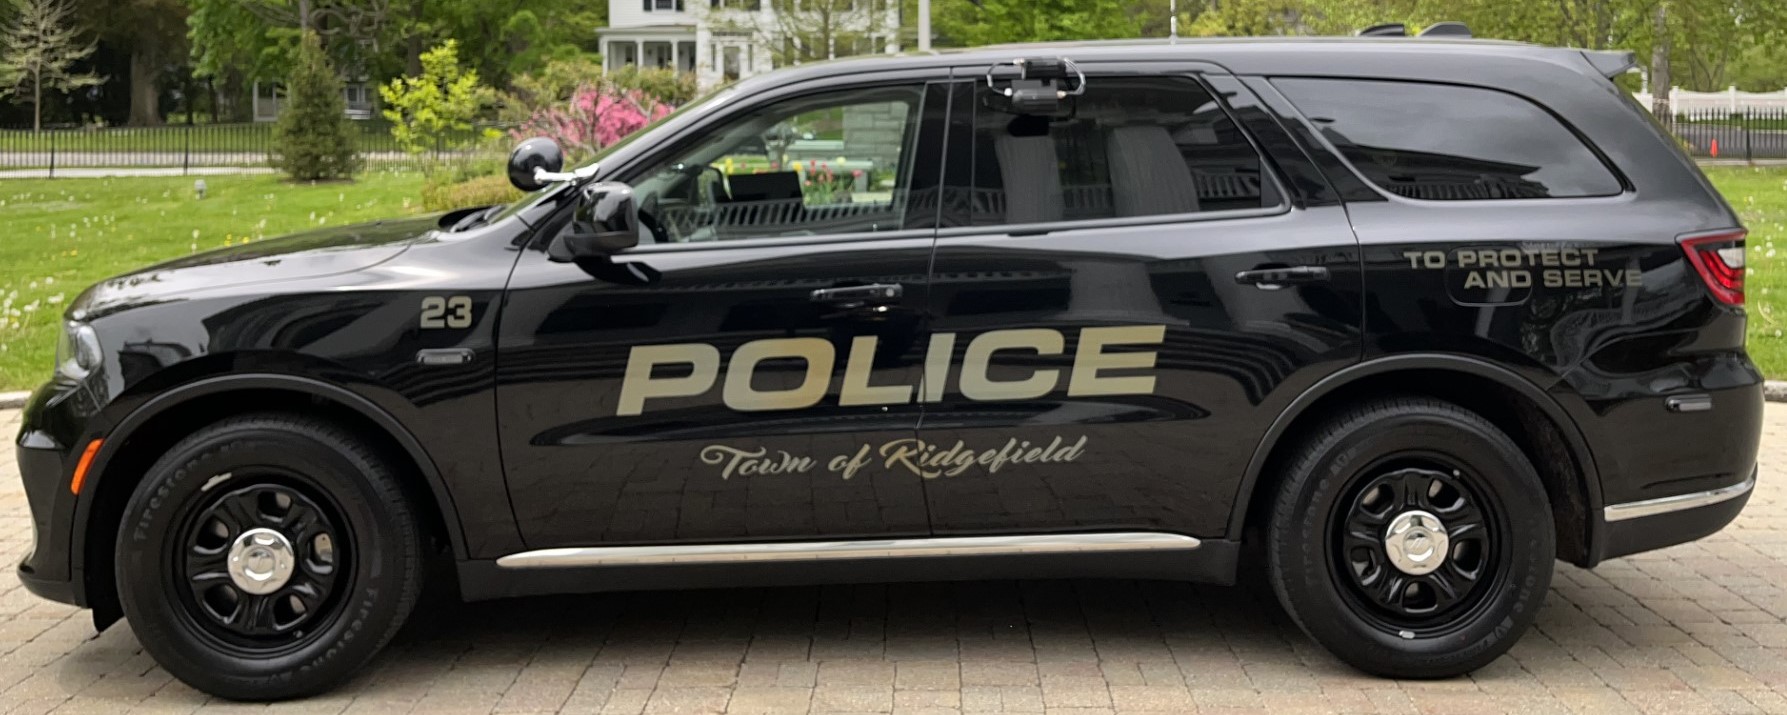 Ridgefield Police Department, CT Public Safety Jobs